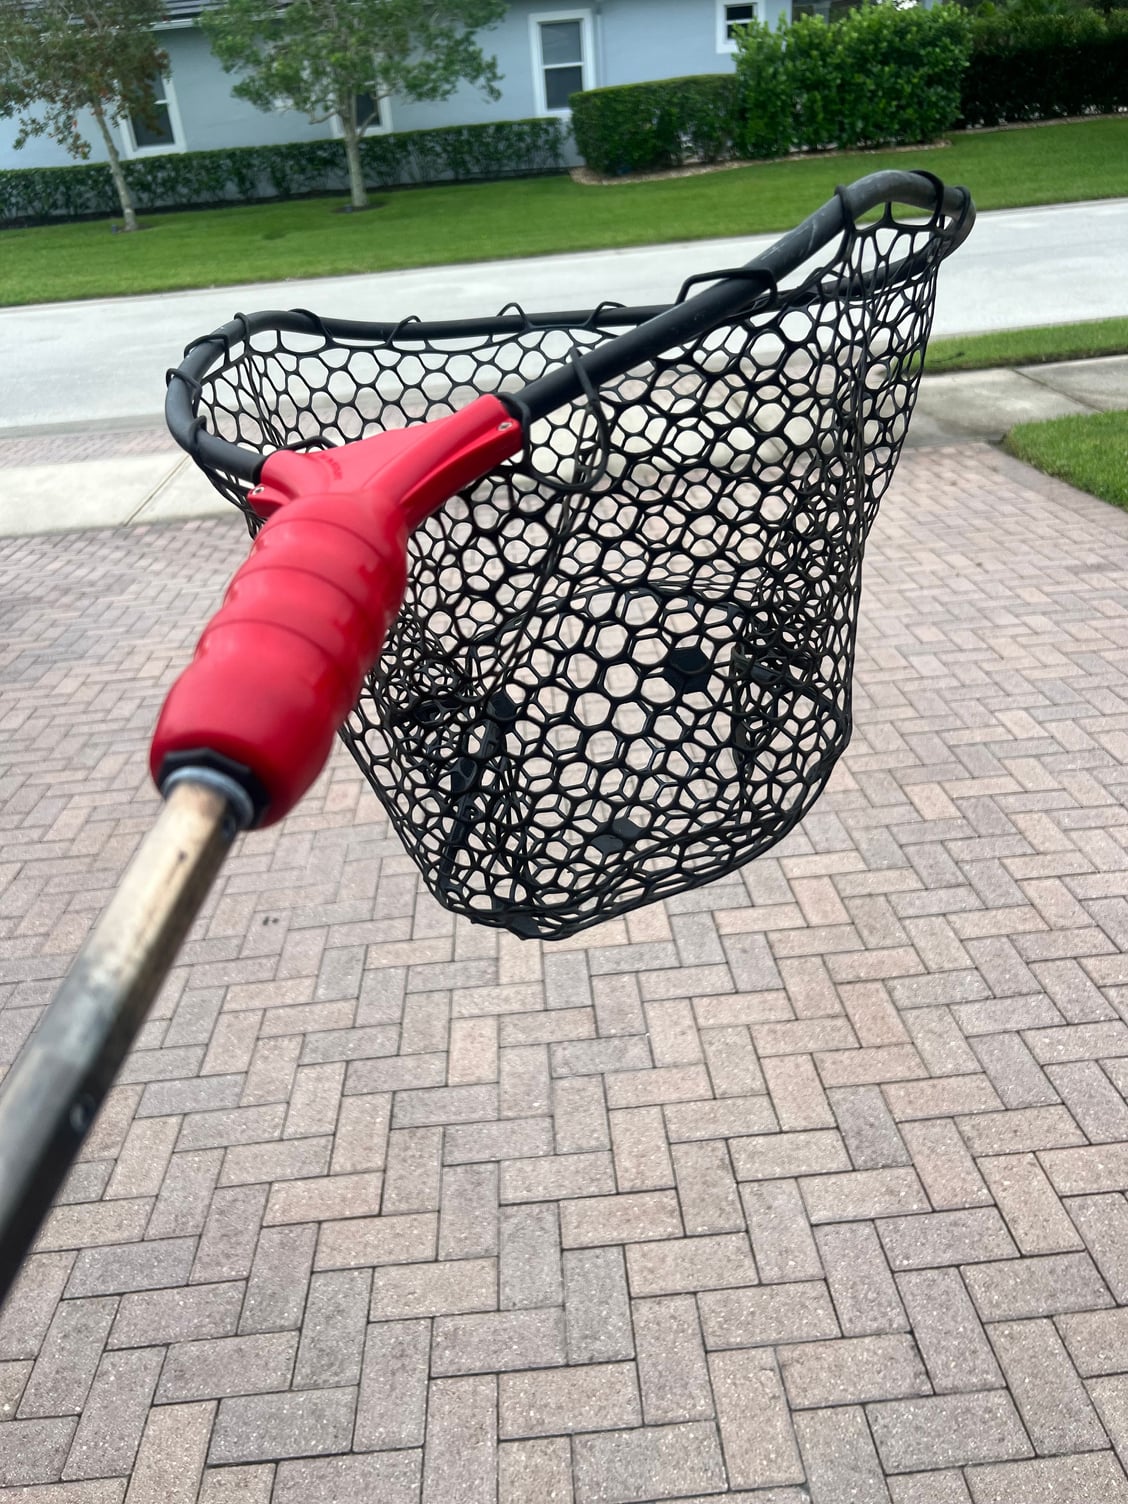 EGO S2 Slider Net w/Rubber netting. Extends to 60” good condition. Stuart,  Florida - The Hull Truth - Boating and Fishing Forum